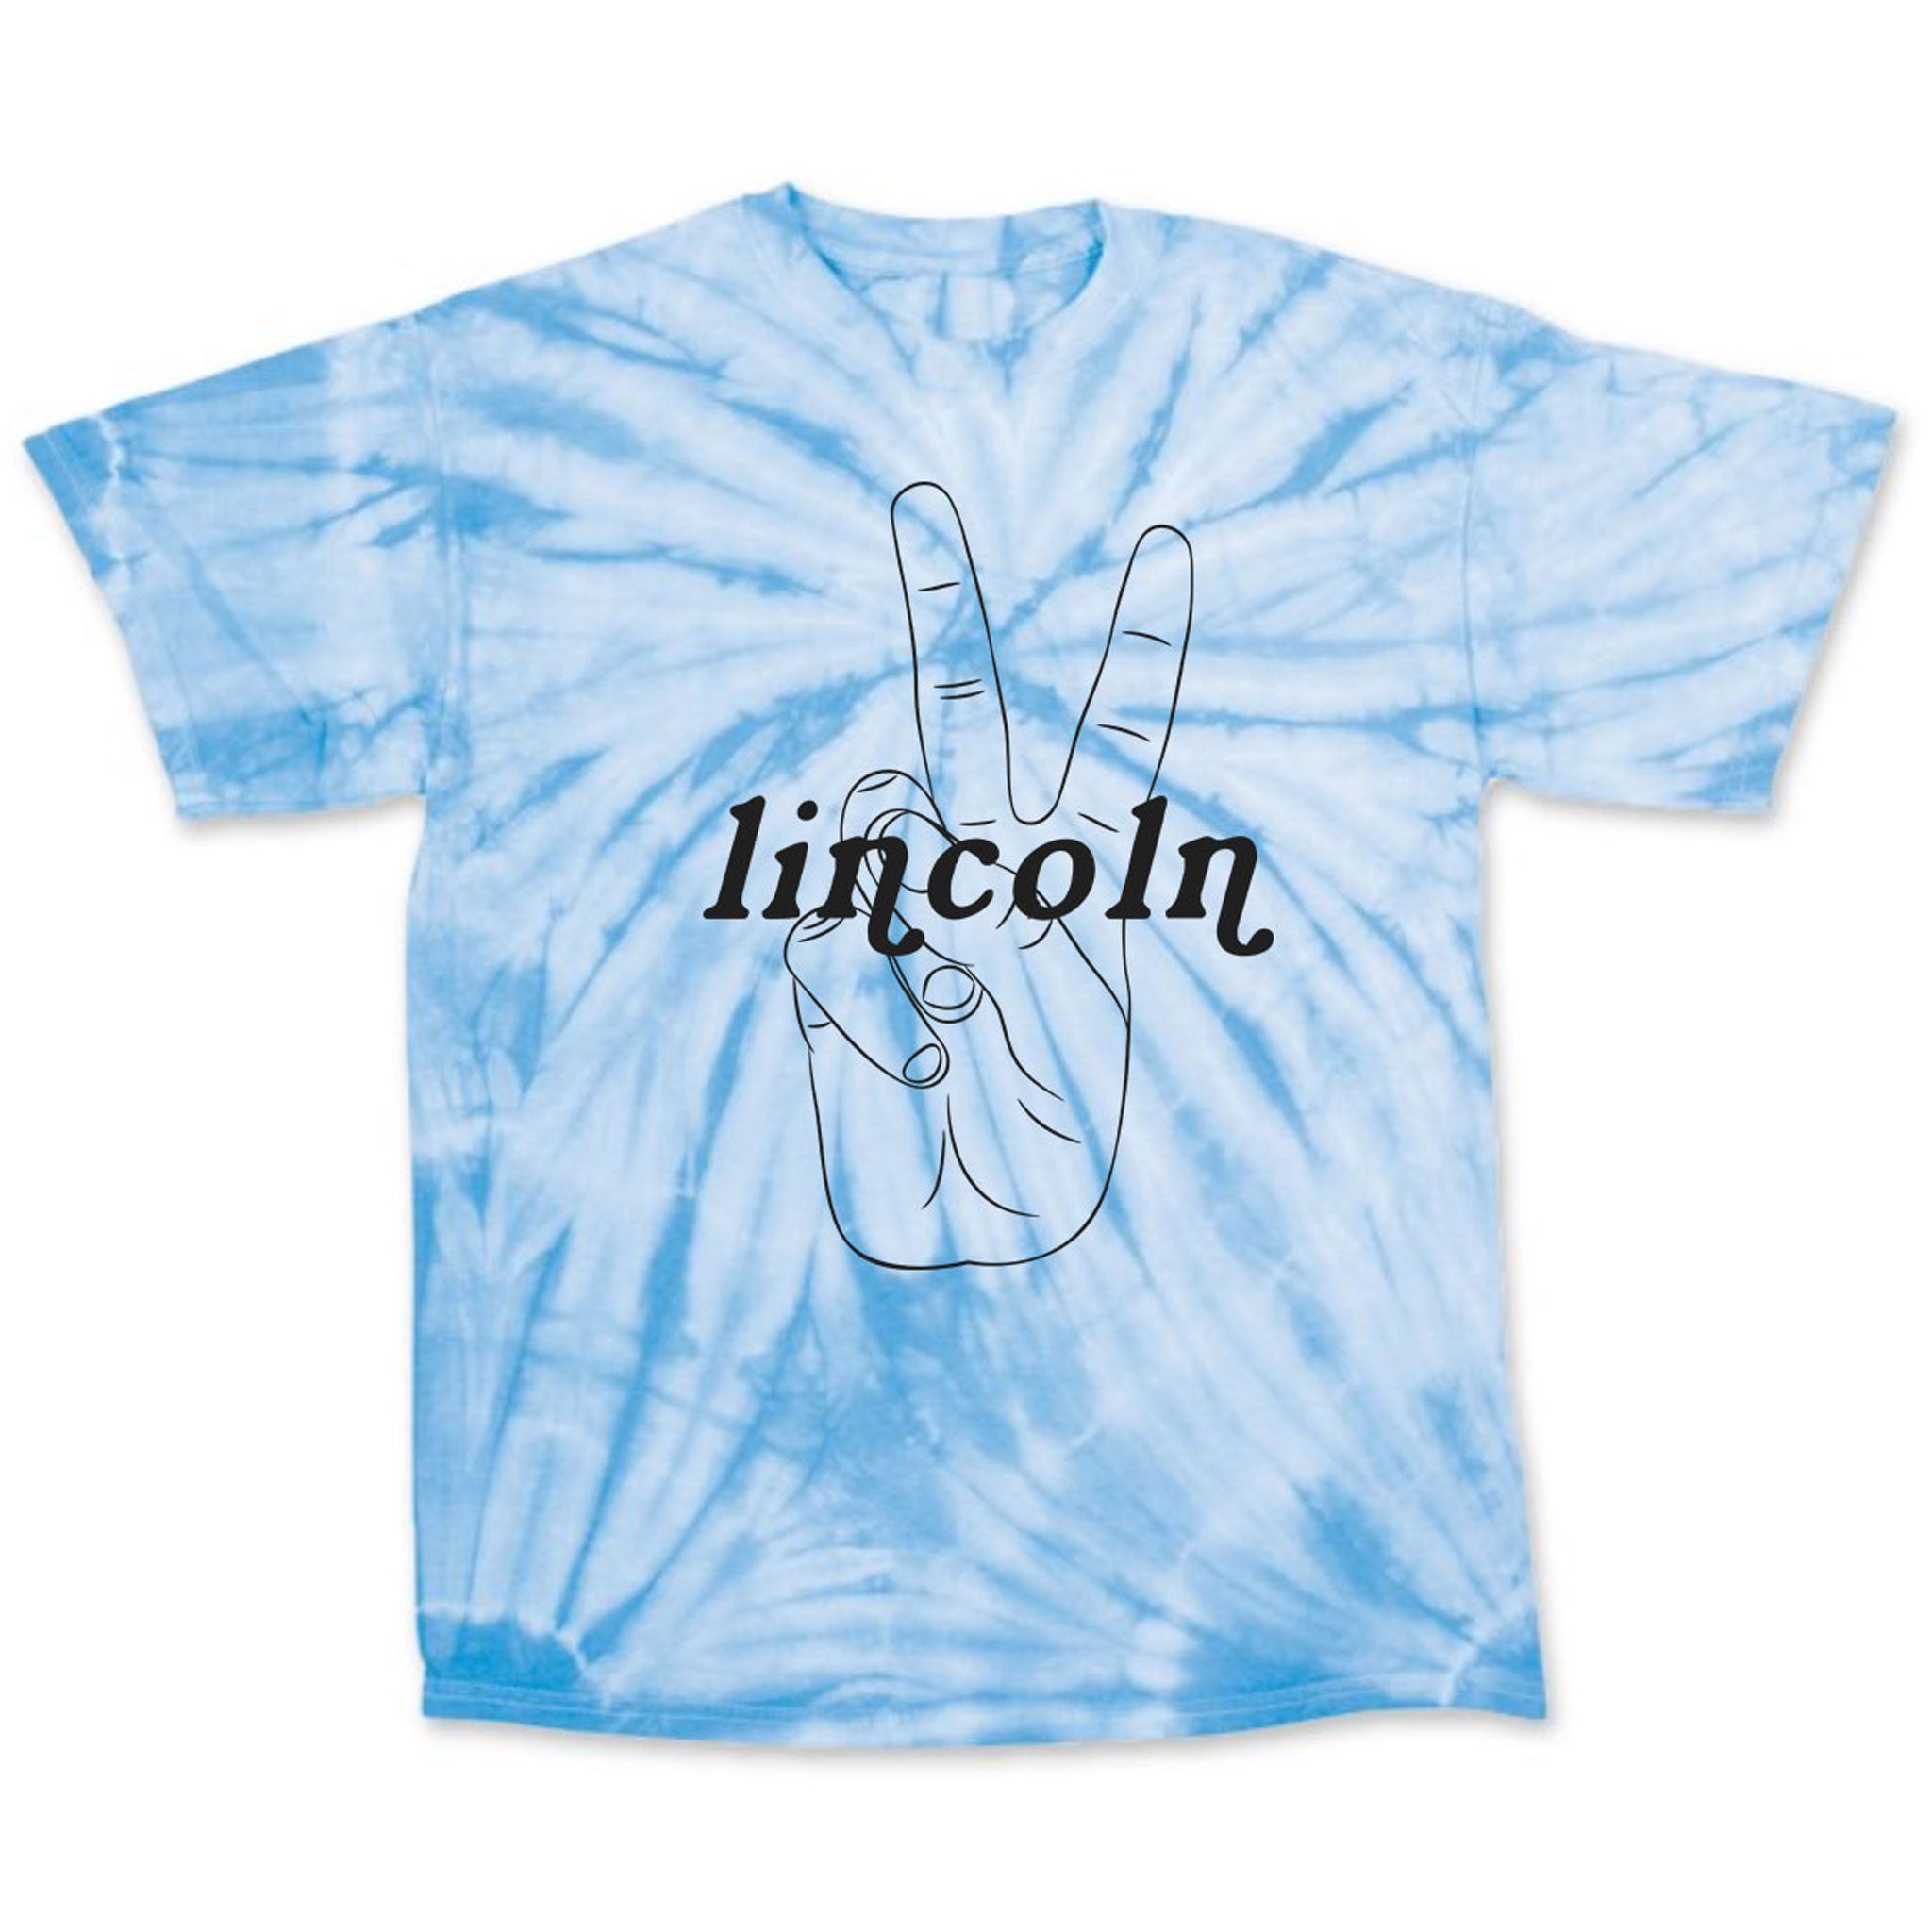 Lincoln Youth Tie Dye Tee - Columbia Blue